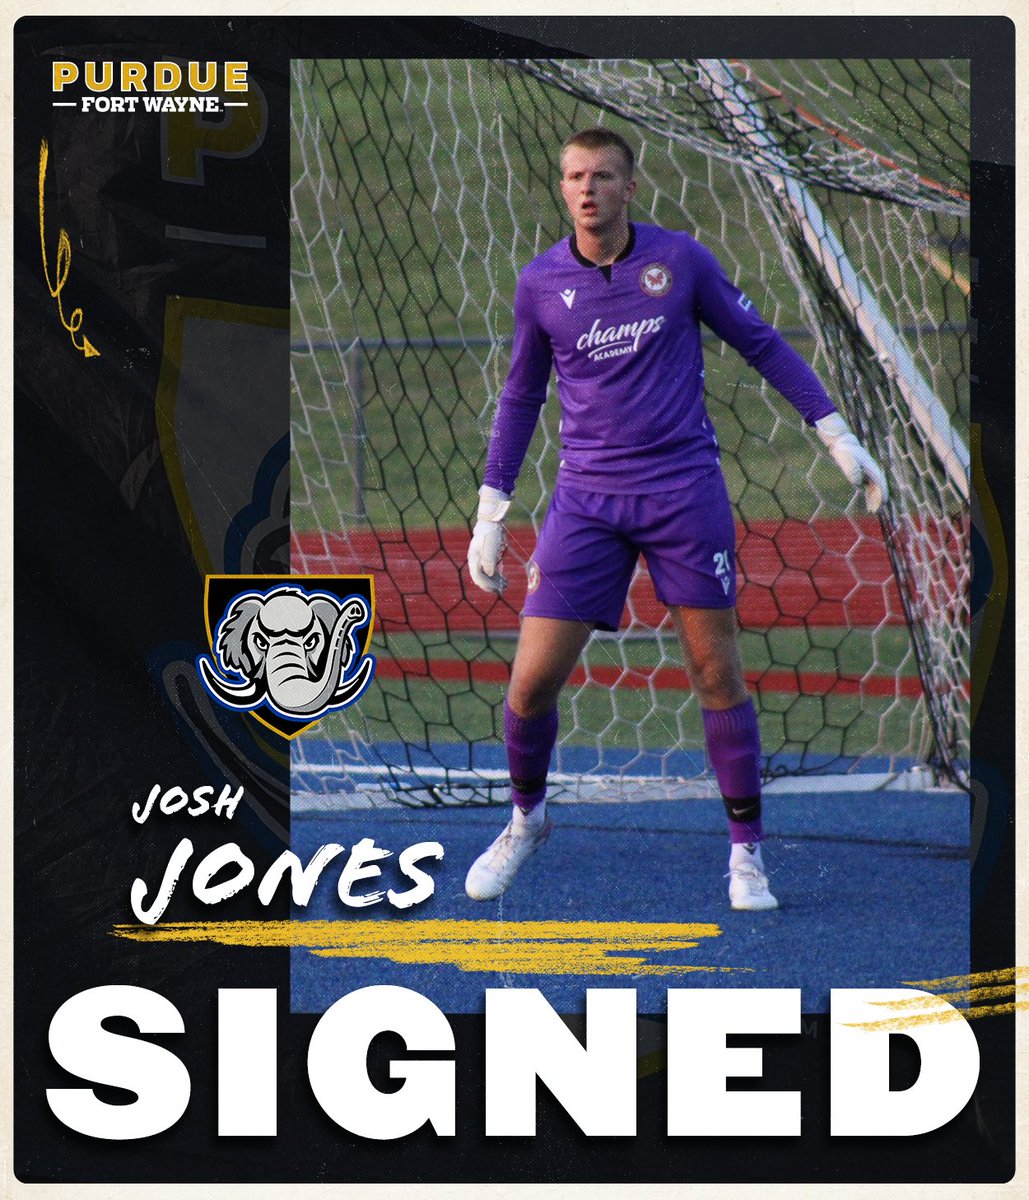 Welcome to Fort Wayne ... Josh Jones!

6'6' goalkeeper
Chatham, IL | Glenwood HS
Springfield FC Academy 
Spent 2023 at Southern Indiana

Welcome to the 'Dons! 

#FeelTheRumble #HLMSOC